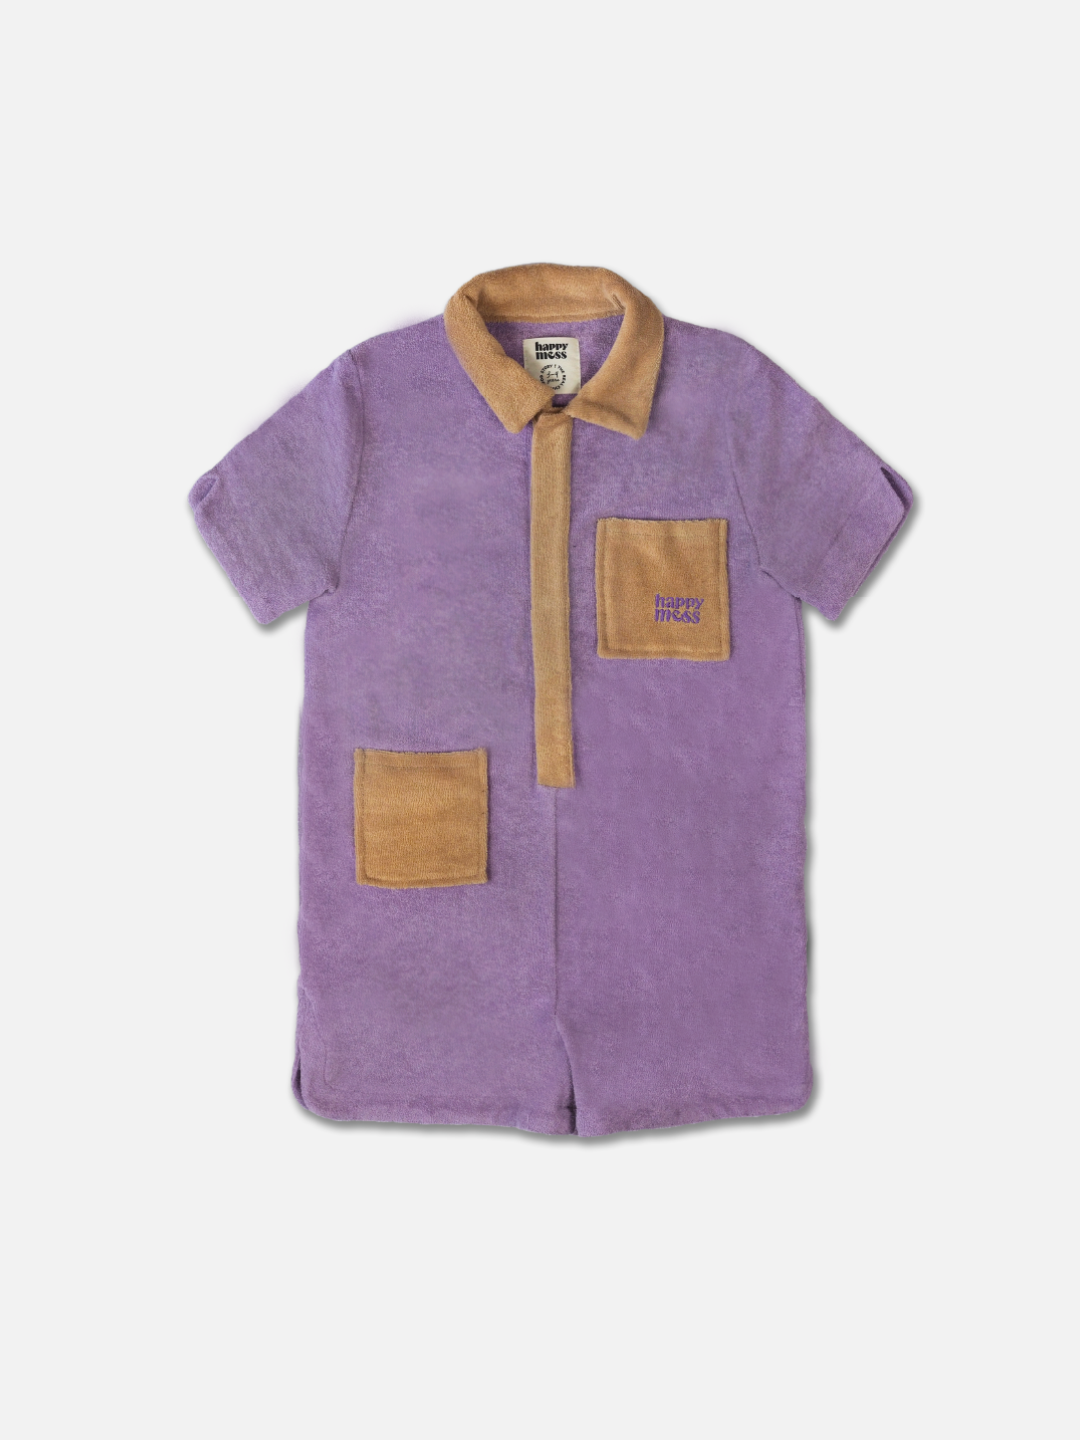 Plum | A kids' jumpsuit in pale plum with sand collar, placket and pockets